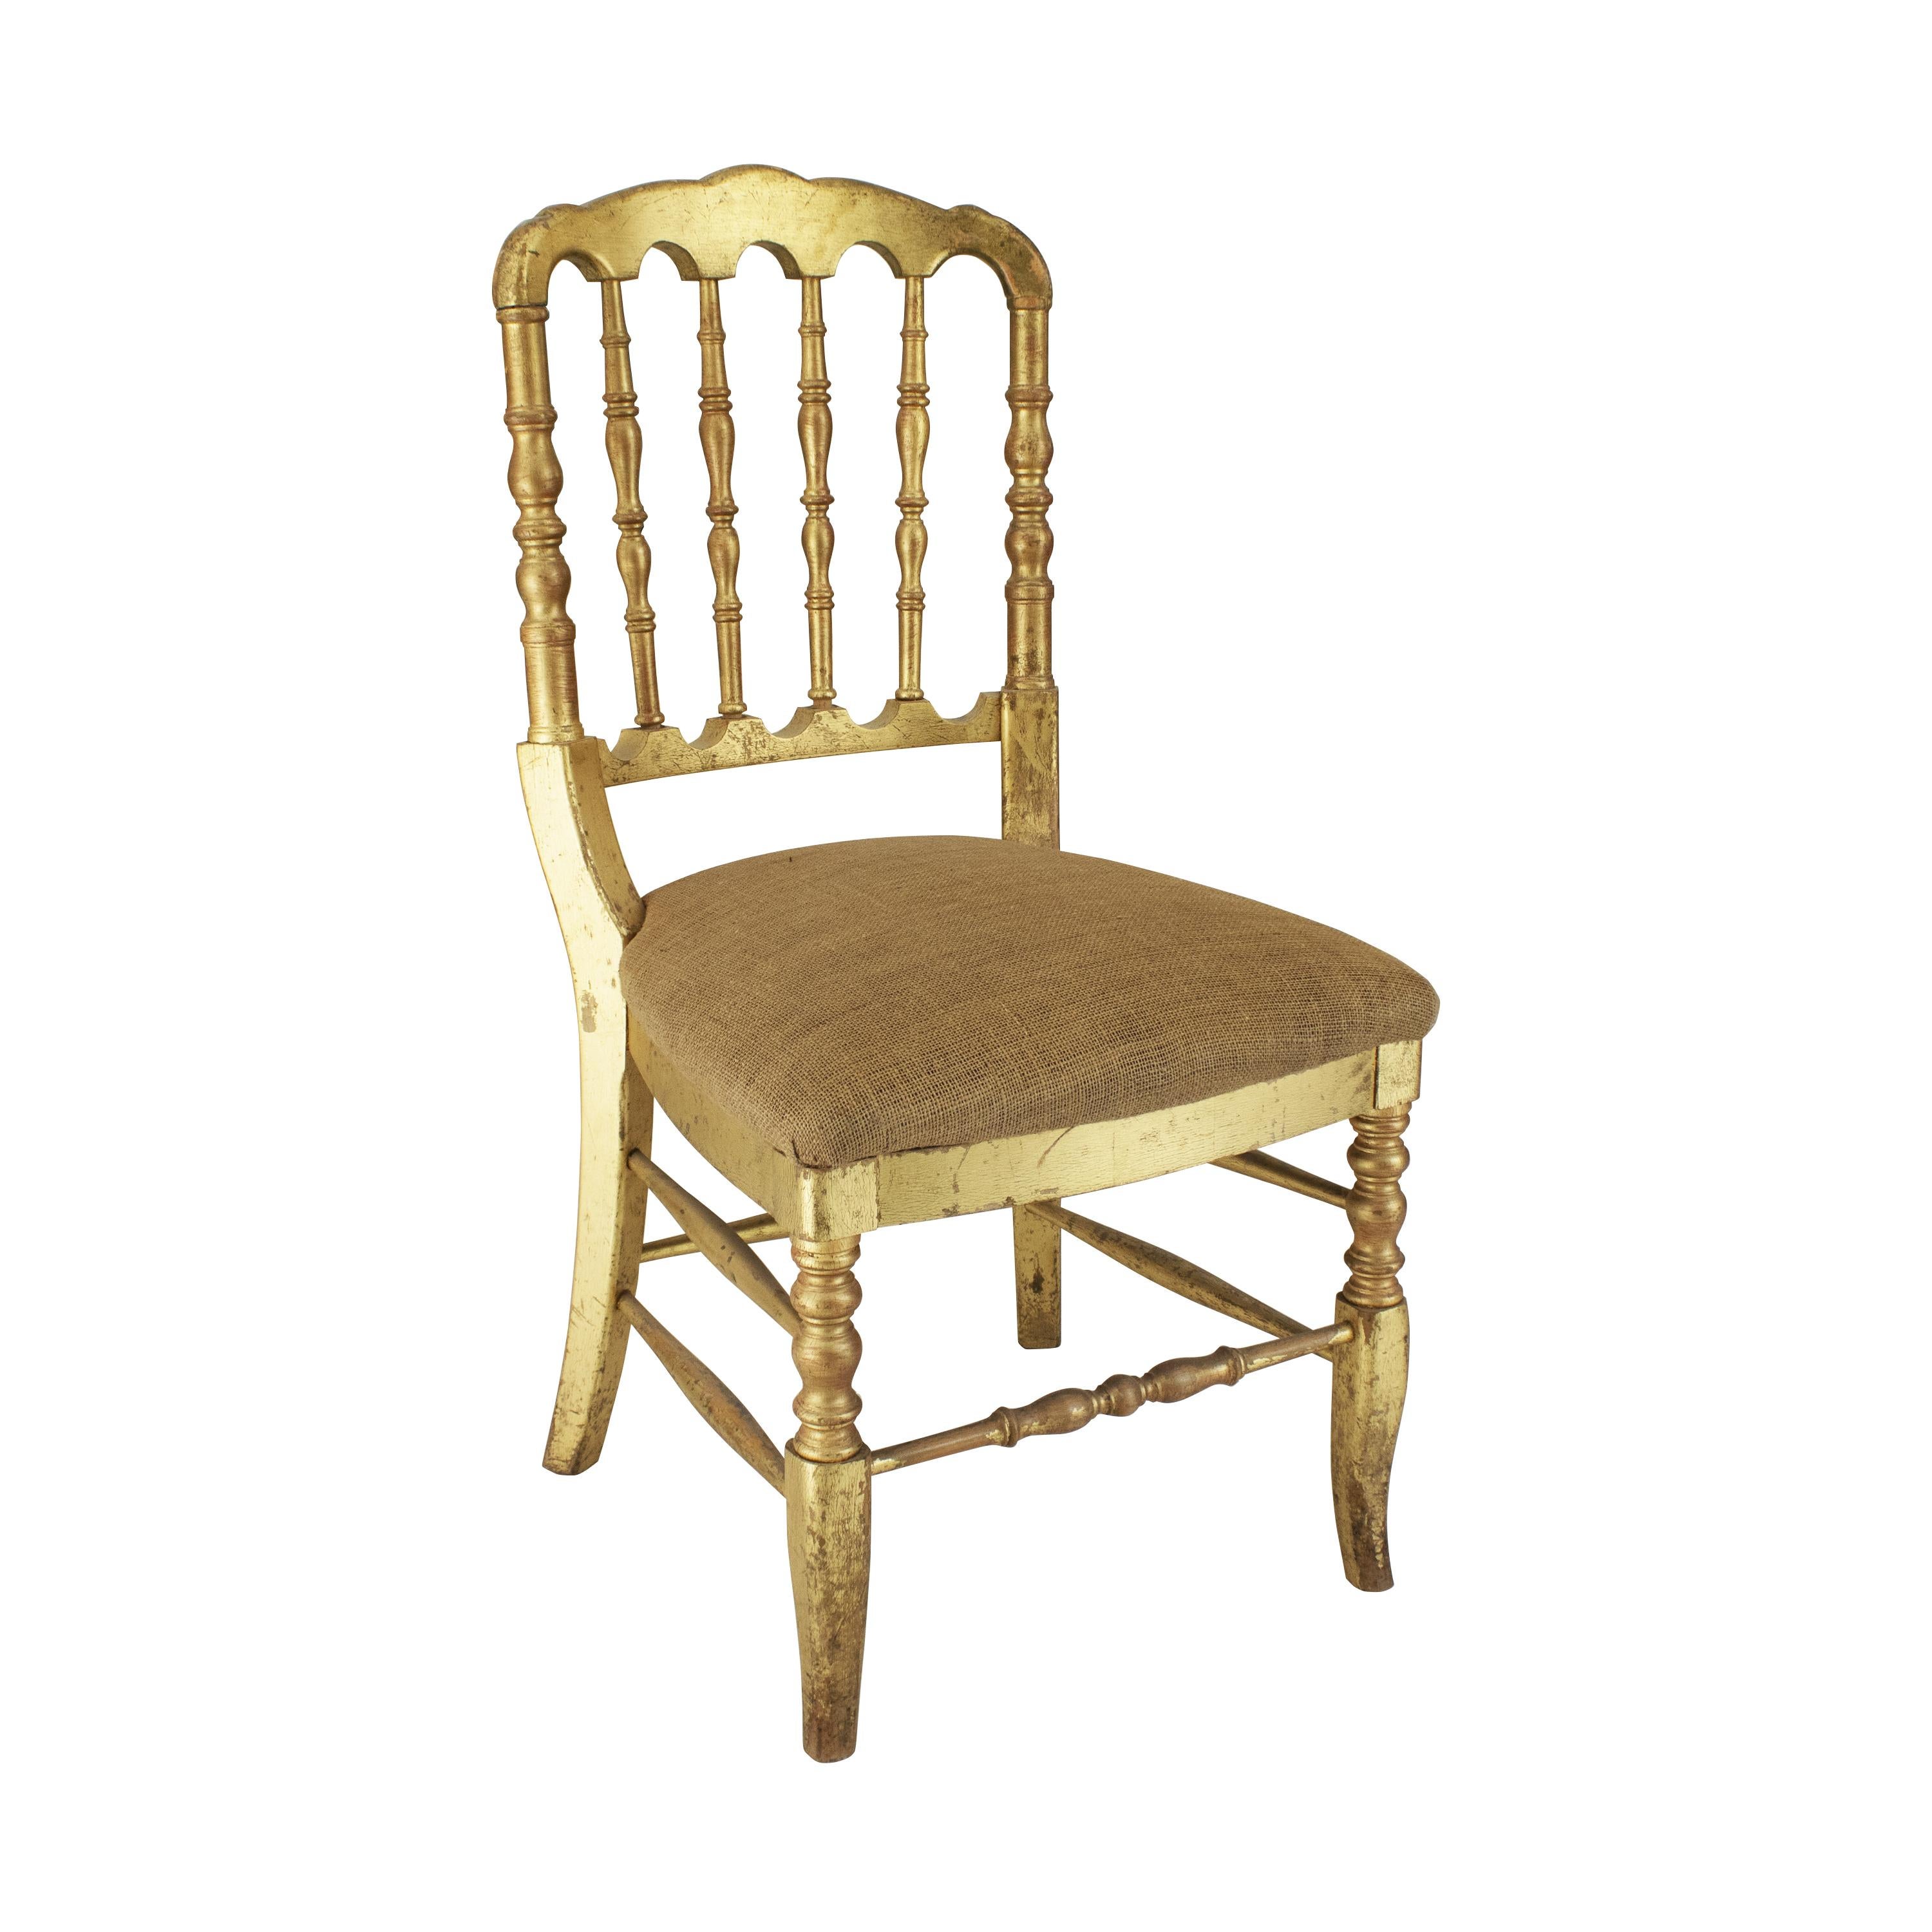 Hand-Crafted Set of 12 Gold Leaf Tiffany, Chiavari Style Chairs, France, 1960s For Sale